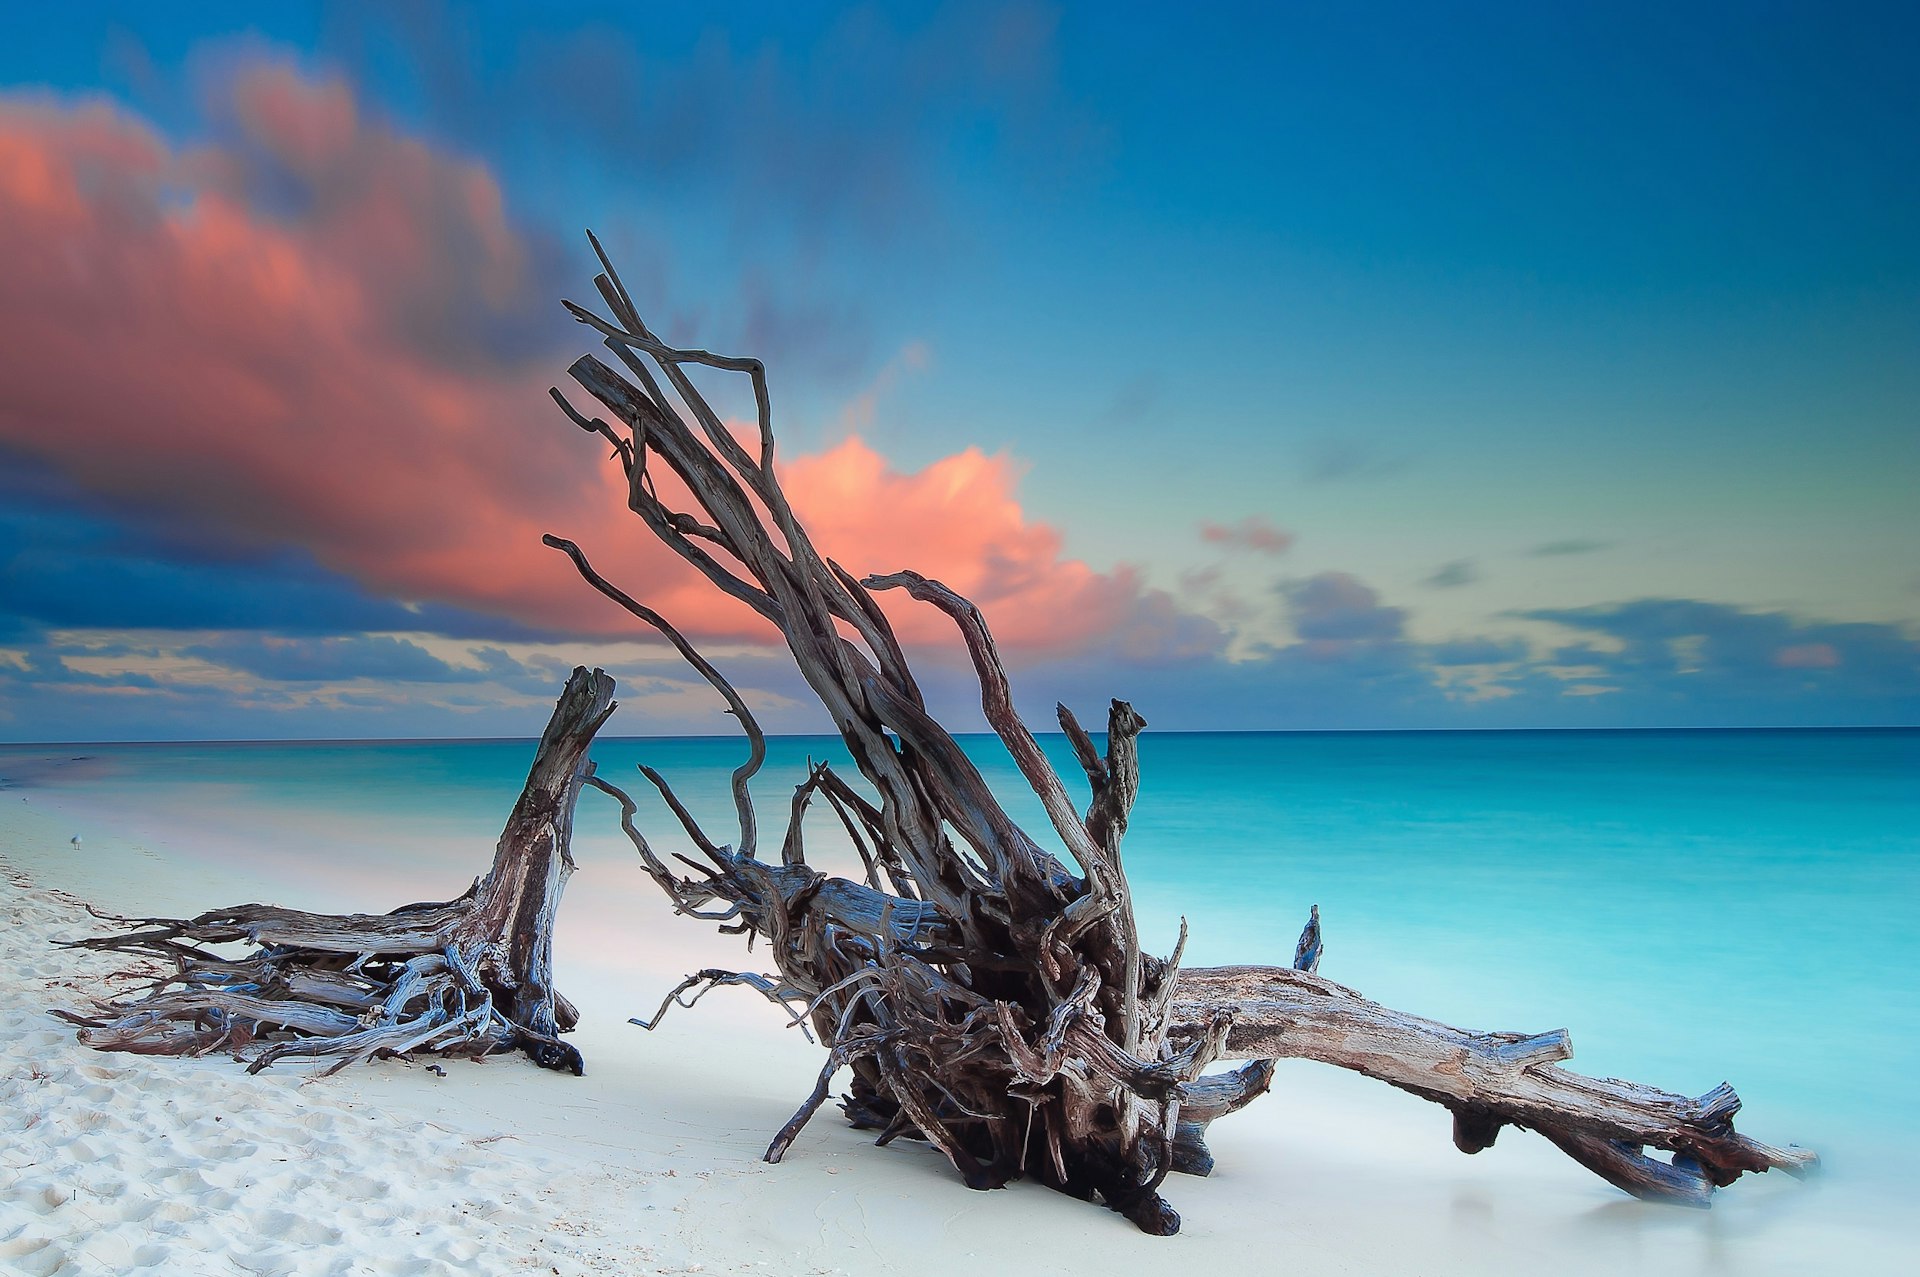 Two pieces of driftwood dominate the shot, surrounded by pristine white sand with turquoise sea stretching into the distance.